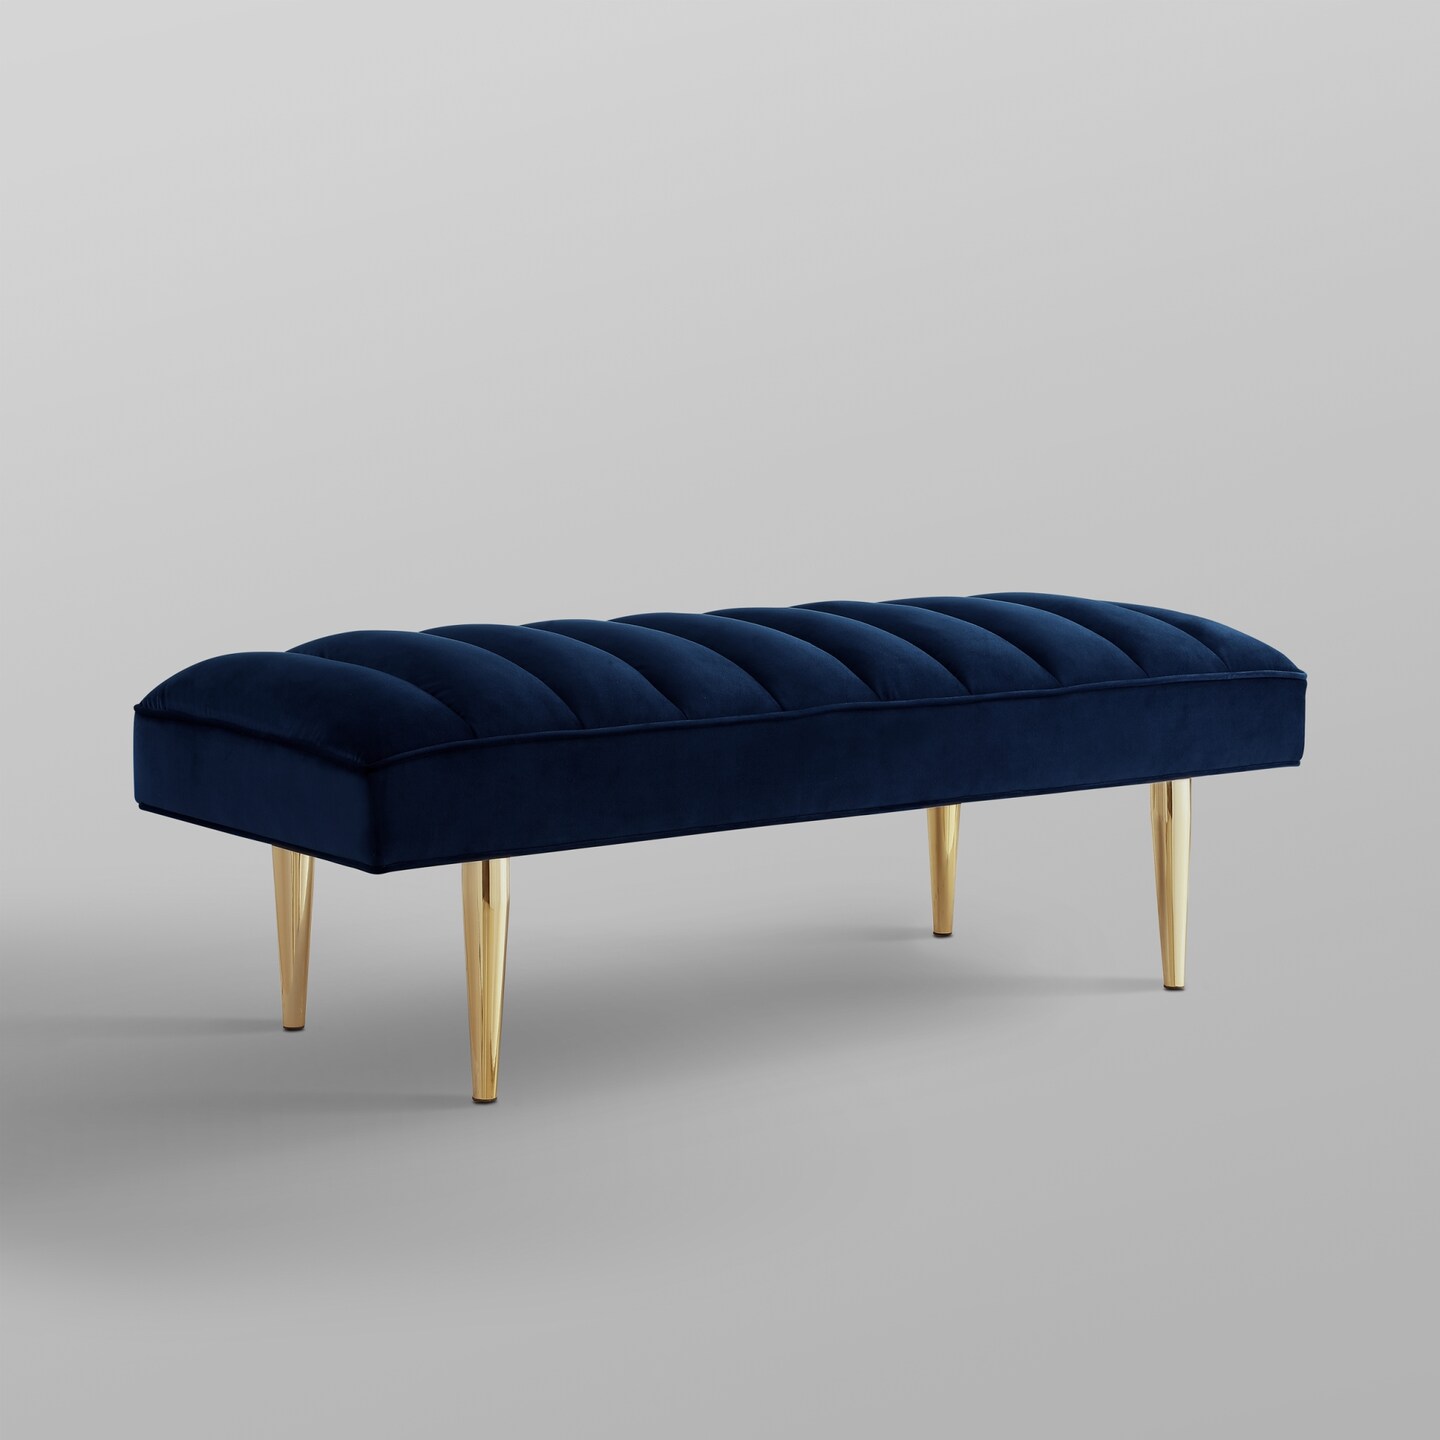 Denver Velvet Channel Tufted Bench with Mirrorred Lacquer Finish With Gold/Chrome Legs